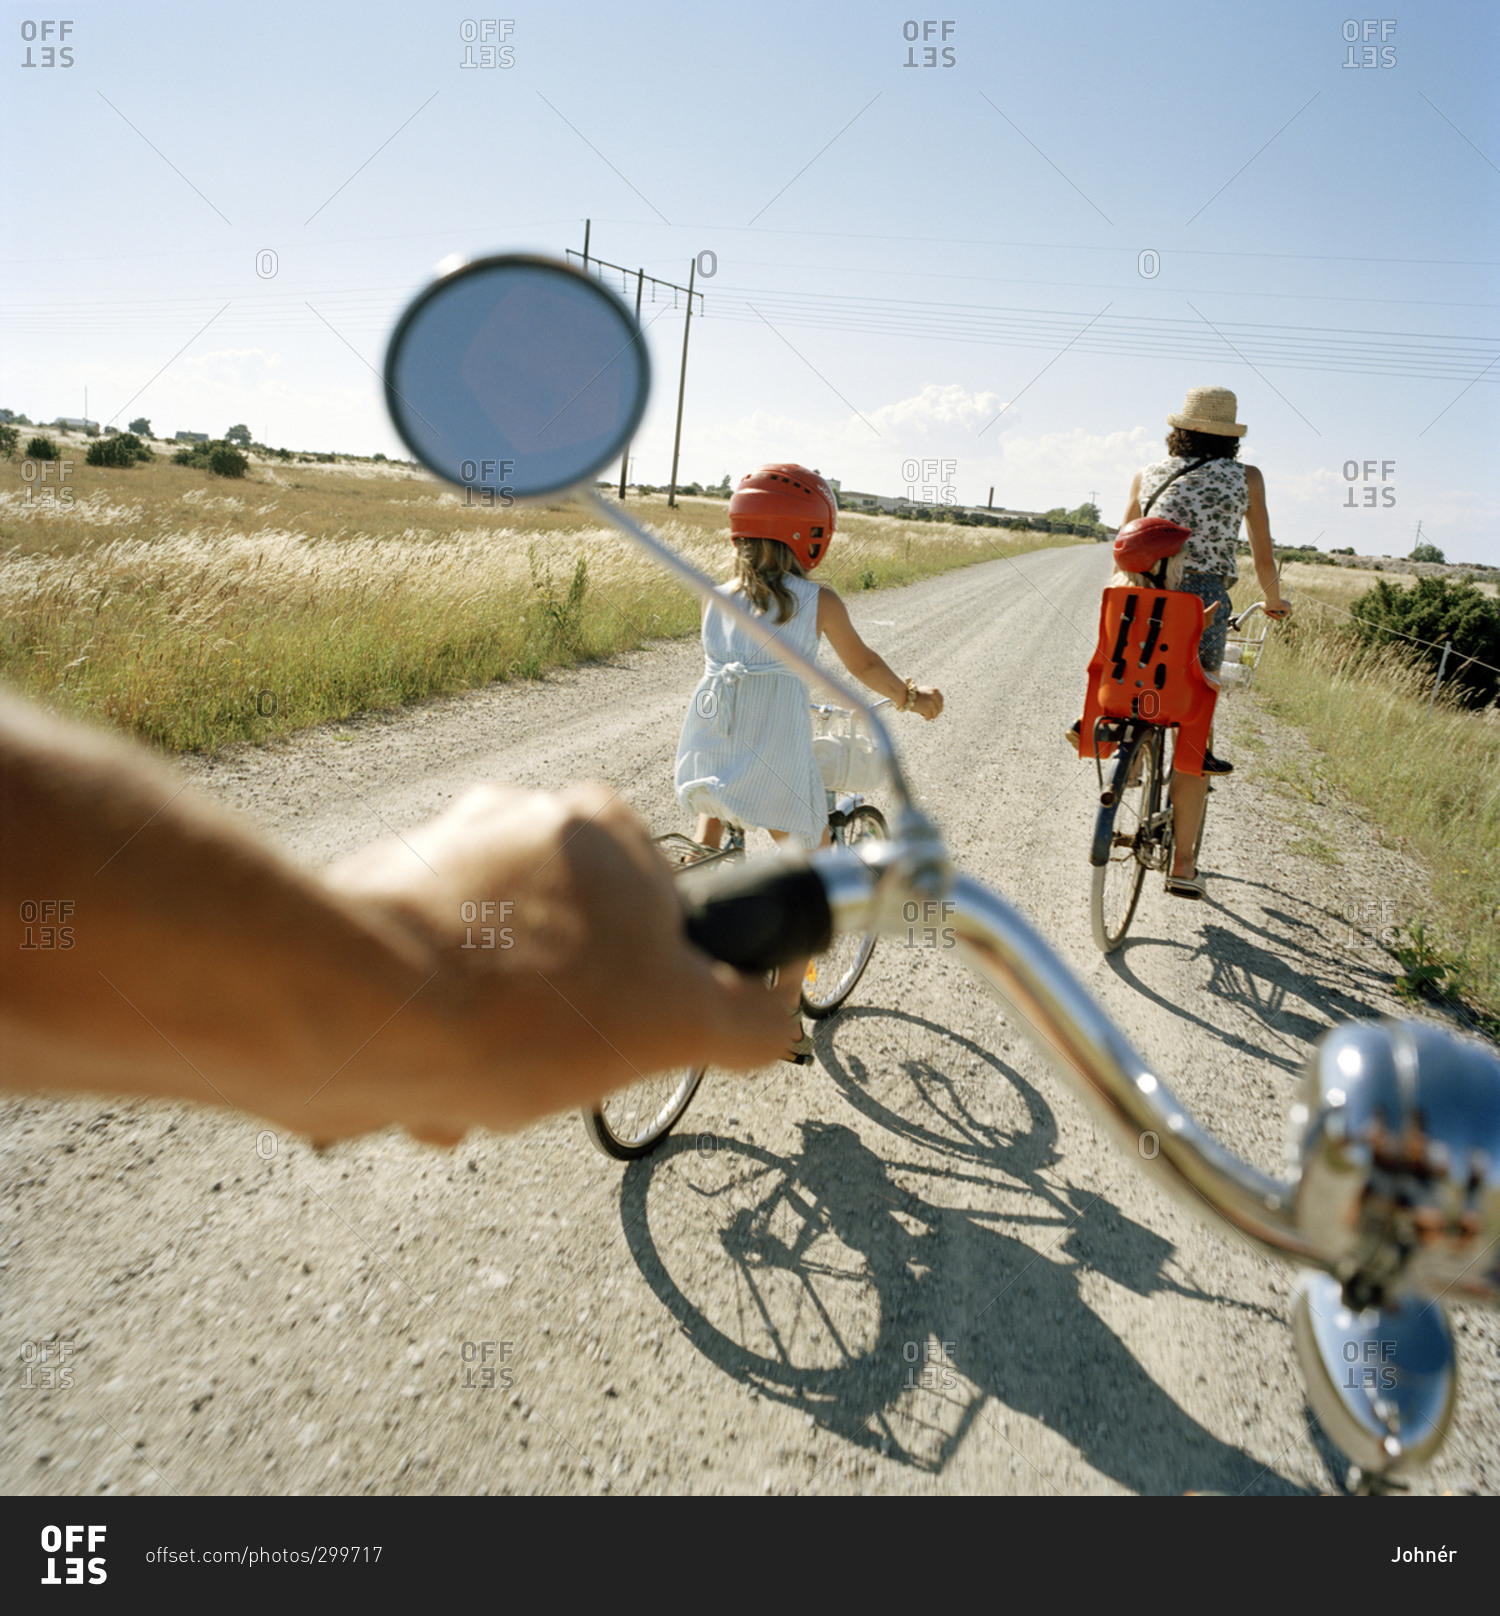 A family on a bicycle ride, Oland, Sweden